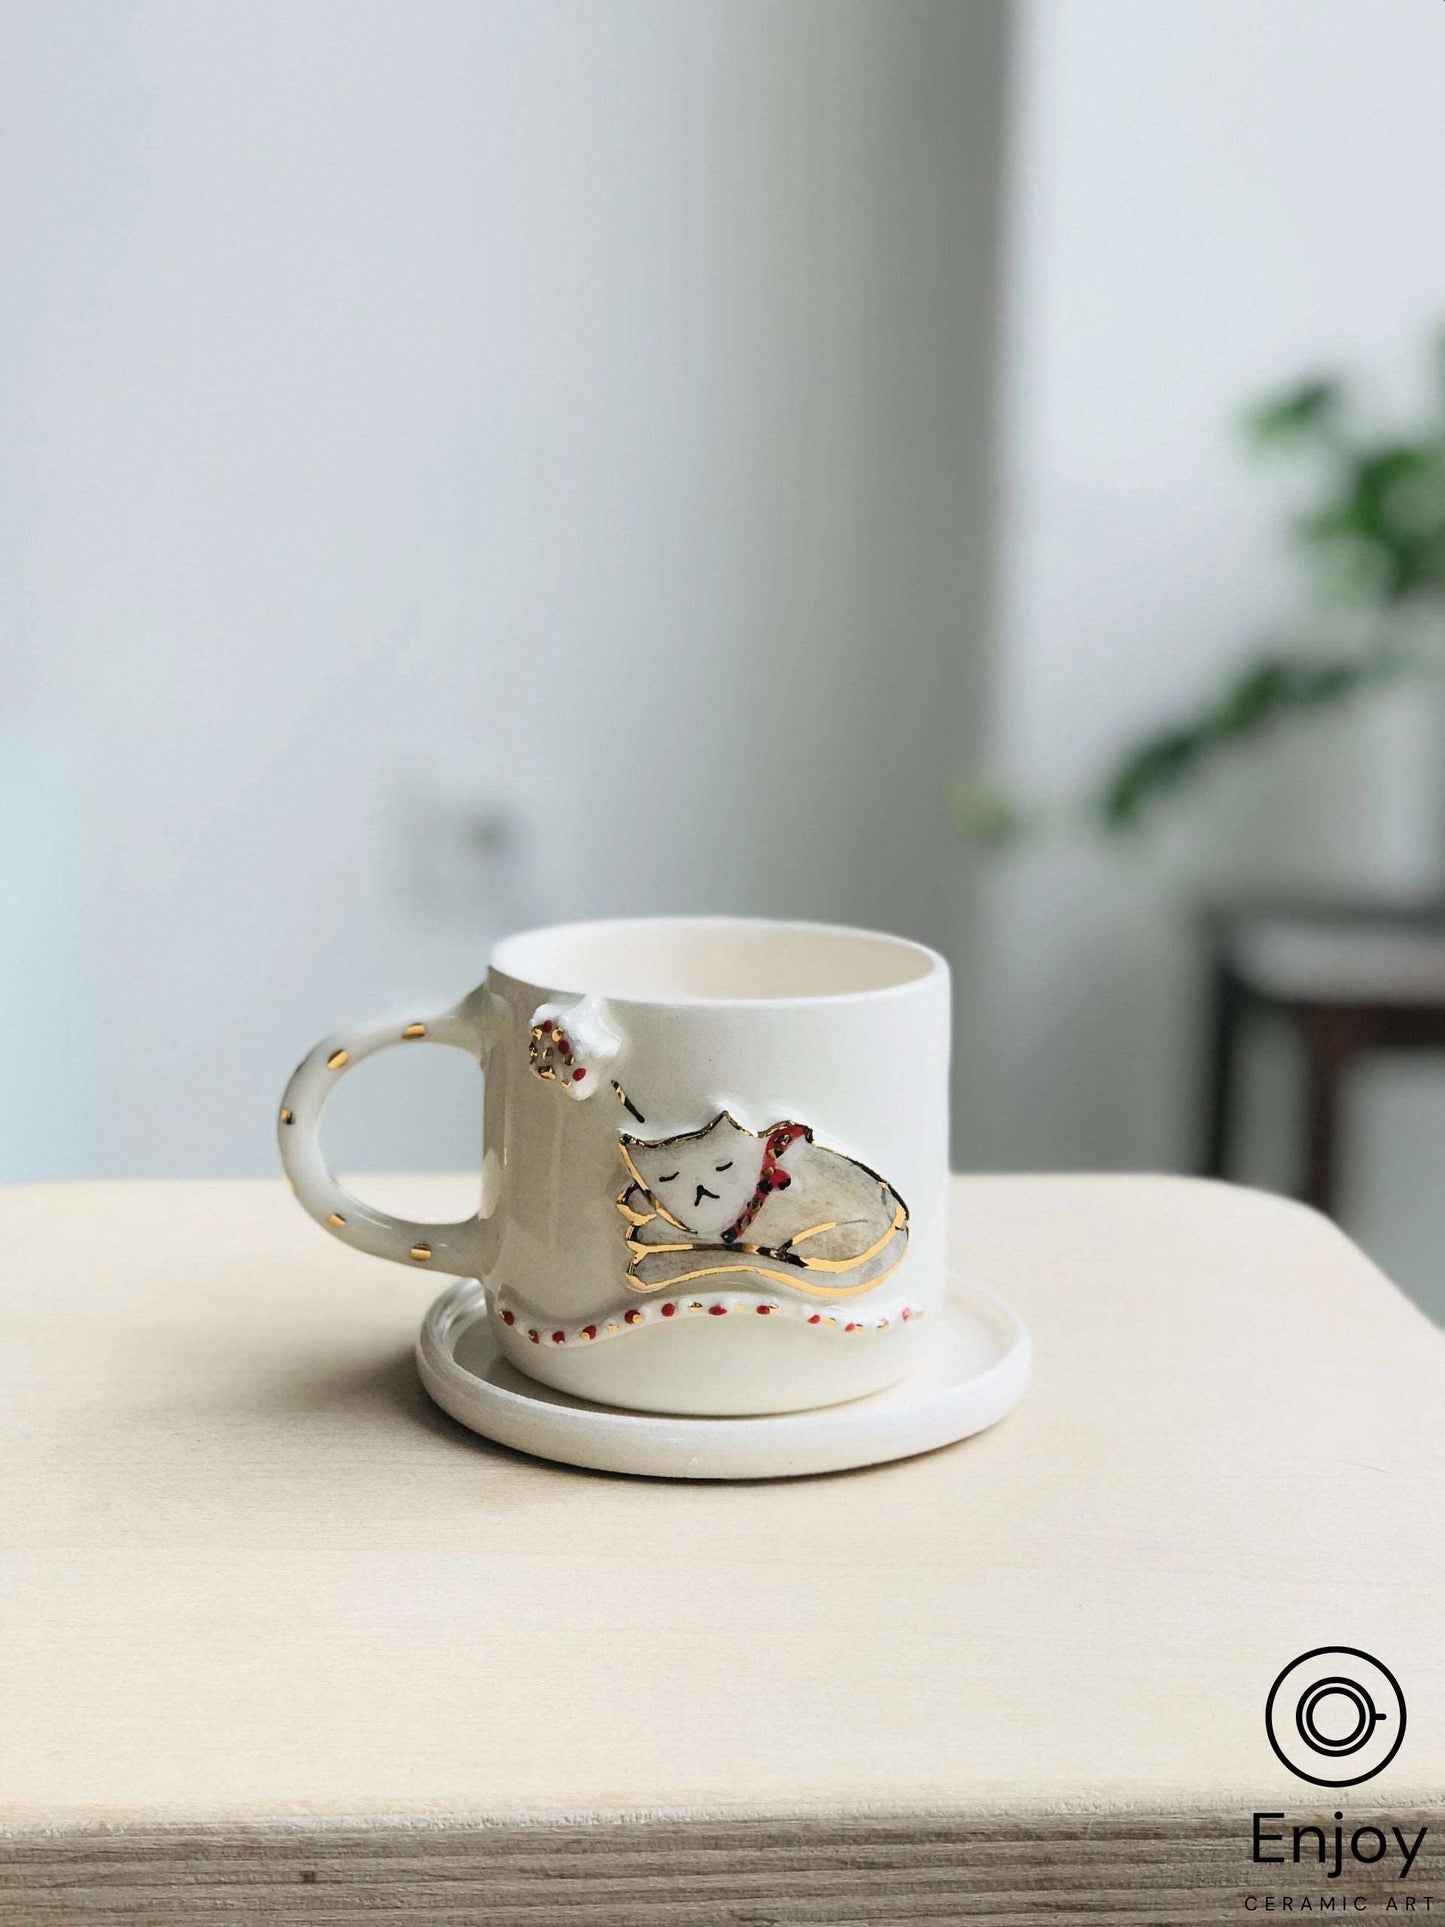 Adorable Handmade Ceramic Kitty Espresso Cup with Saucer Set - 5.4 oz Cat Coffee Cup, Perfect Gift for Cat Lovers, Cat Mom Mug